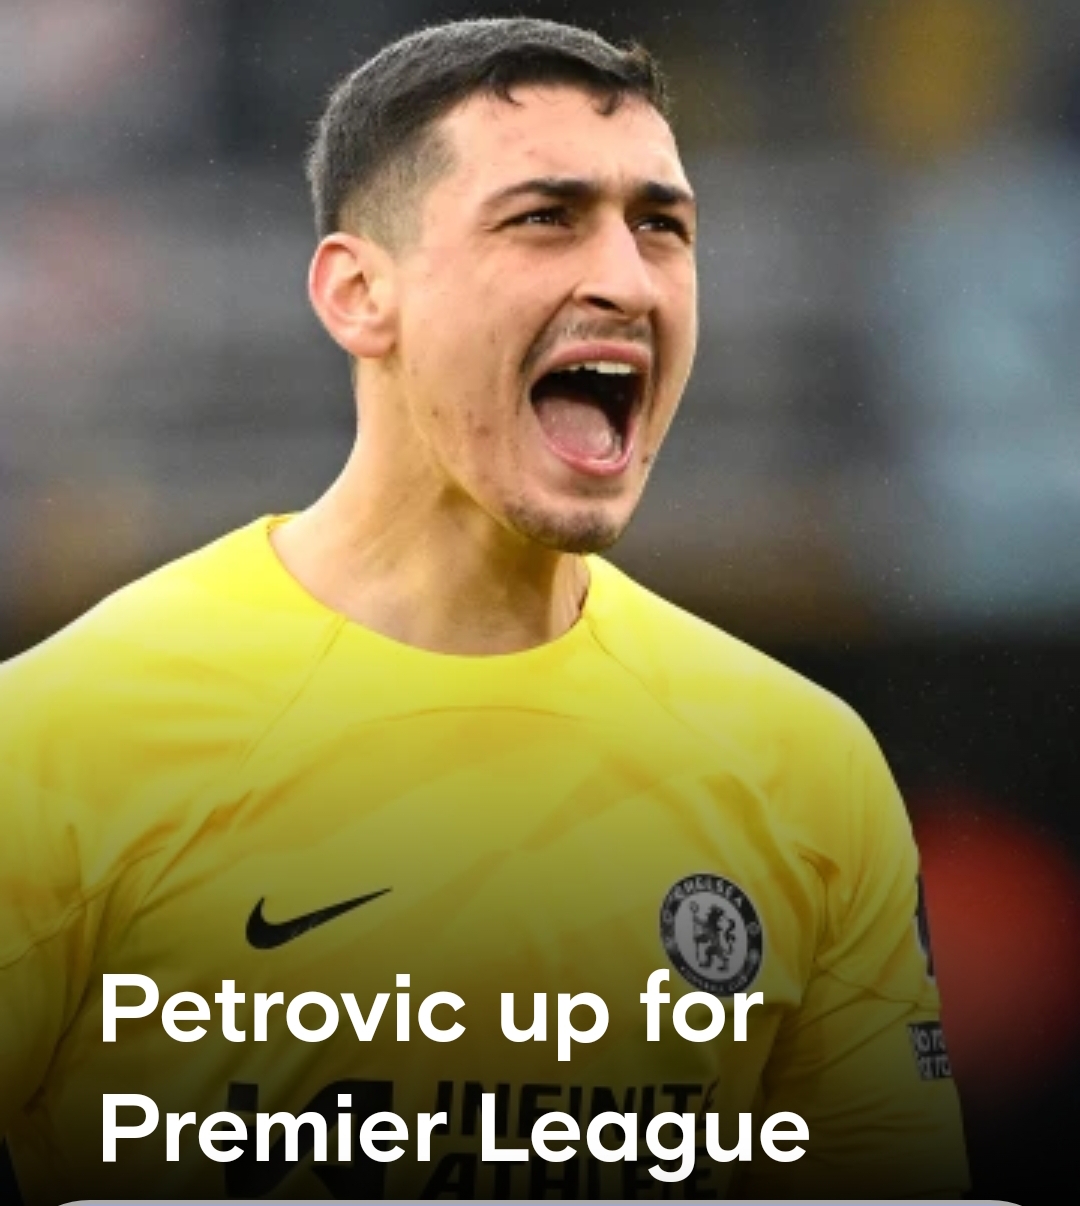 Djordje Petrovic has been nominated for